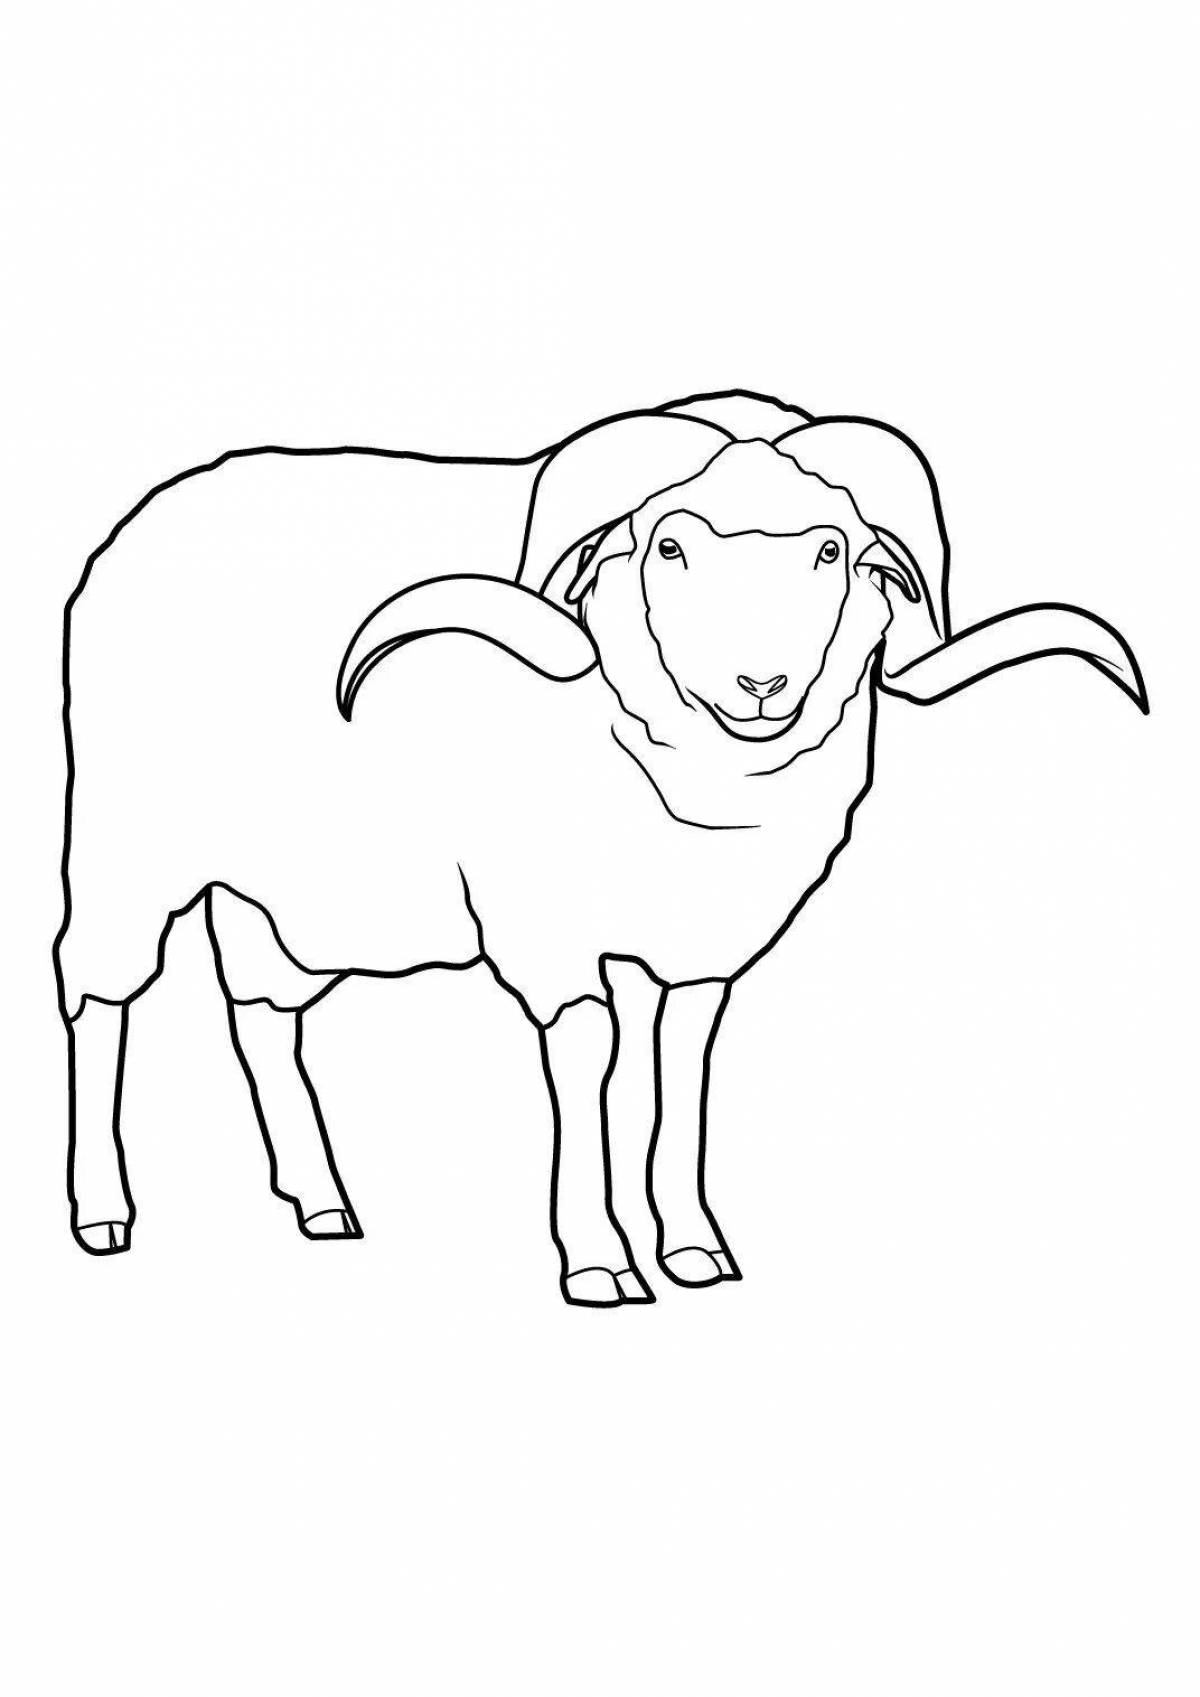 Altai mountain sheep animated coloring page